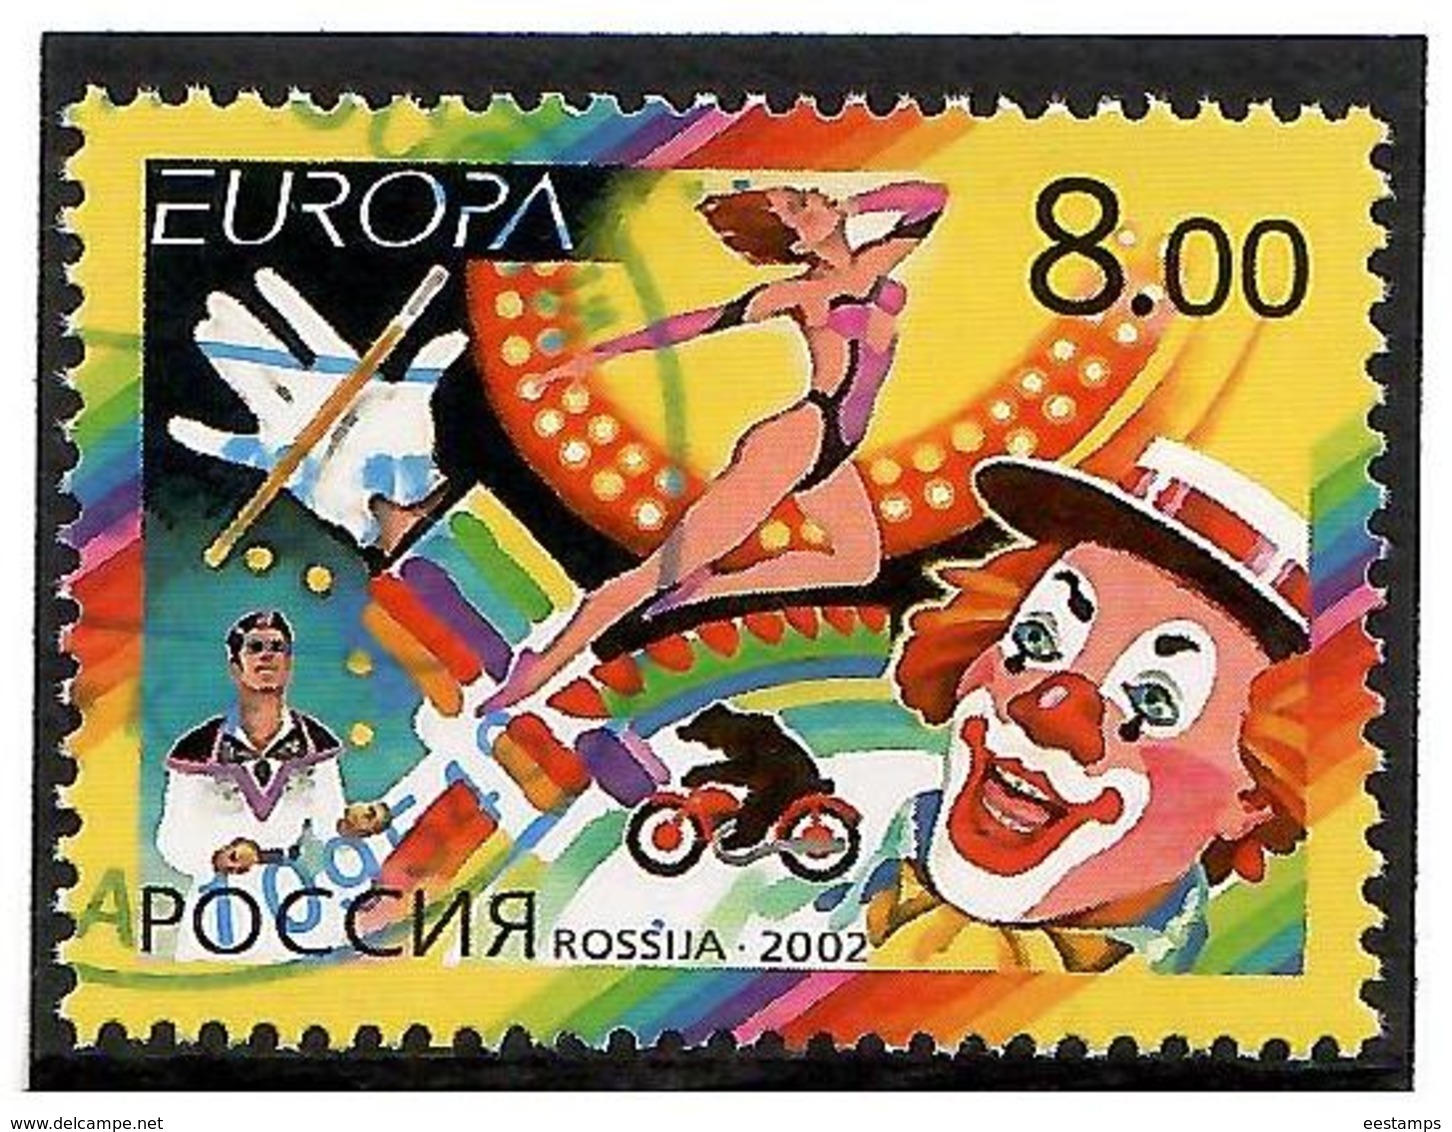 Russia.2002 EUROPA  (Circus). 1v: 8.00   Michel # 987  (oo) - Used Stamps